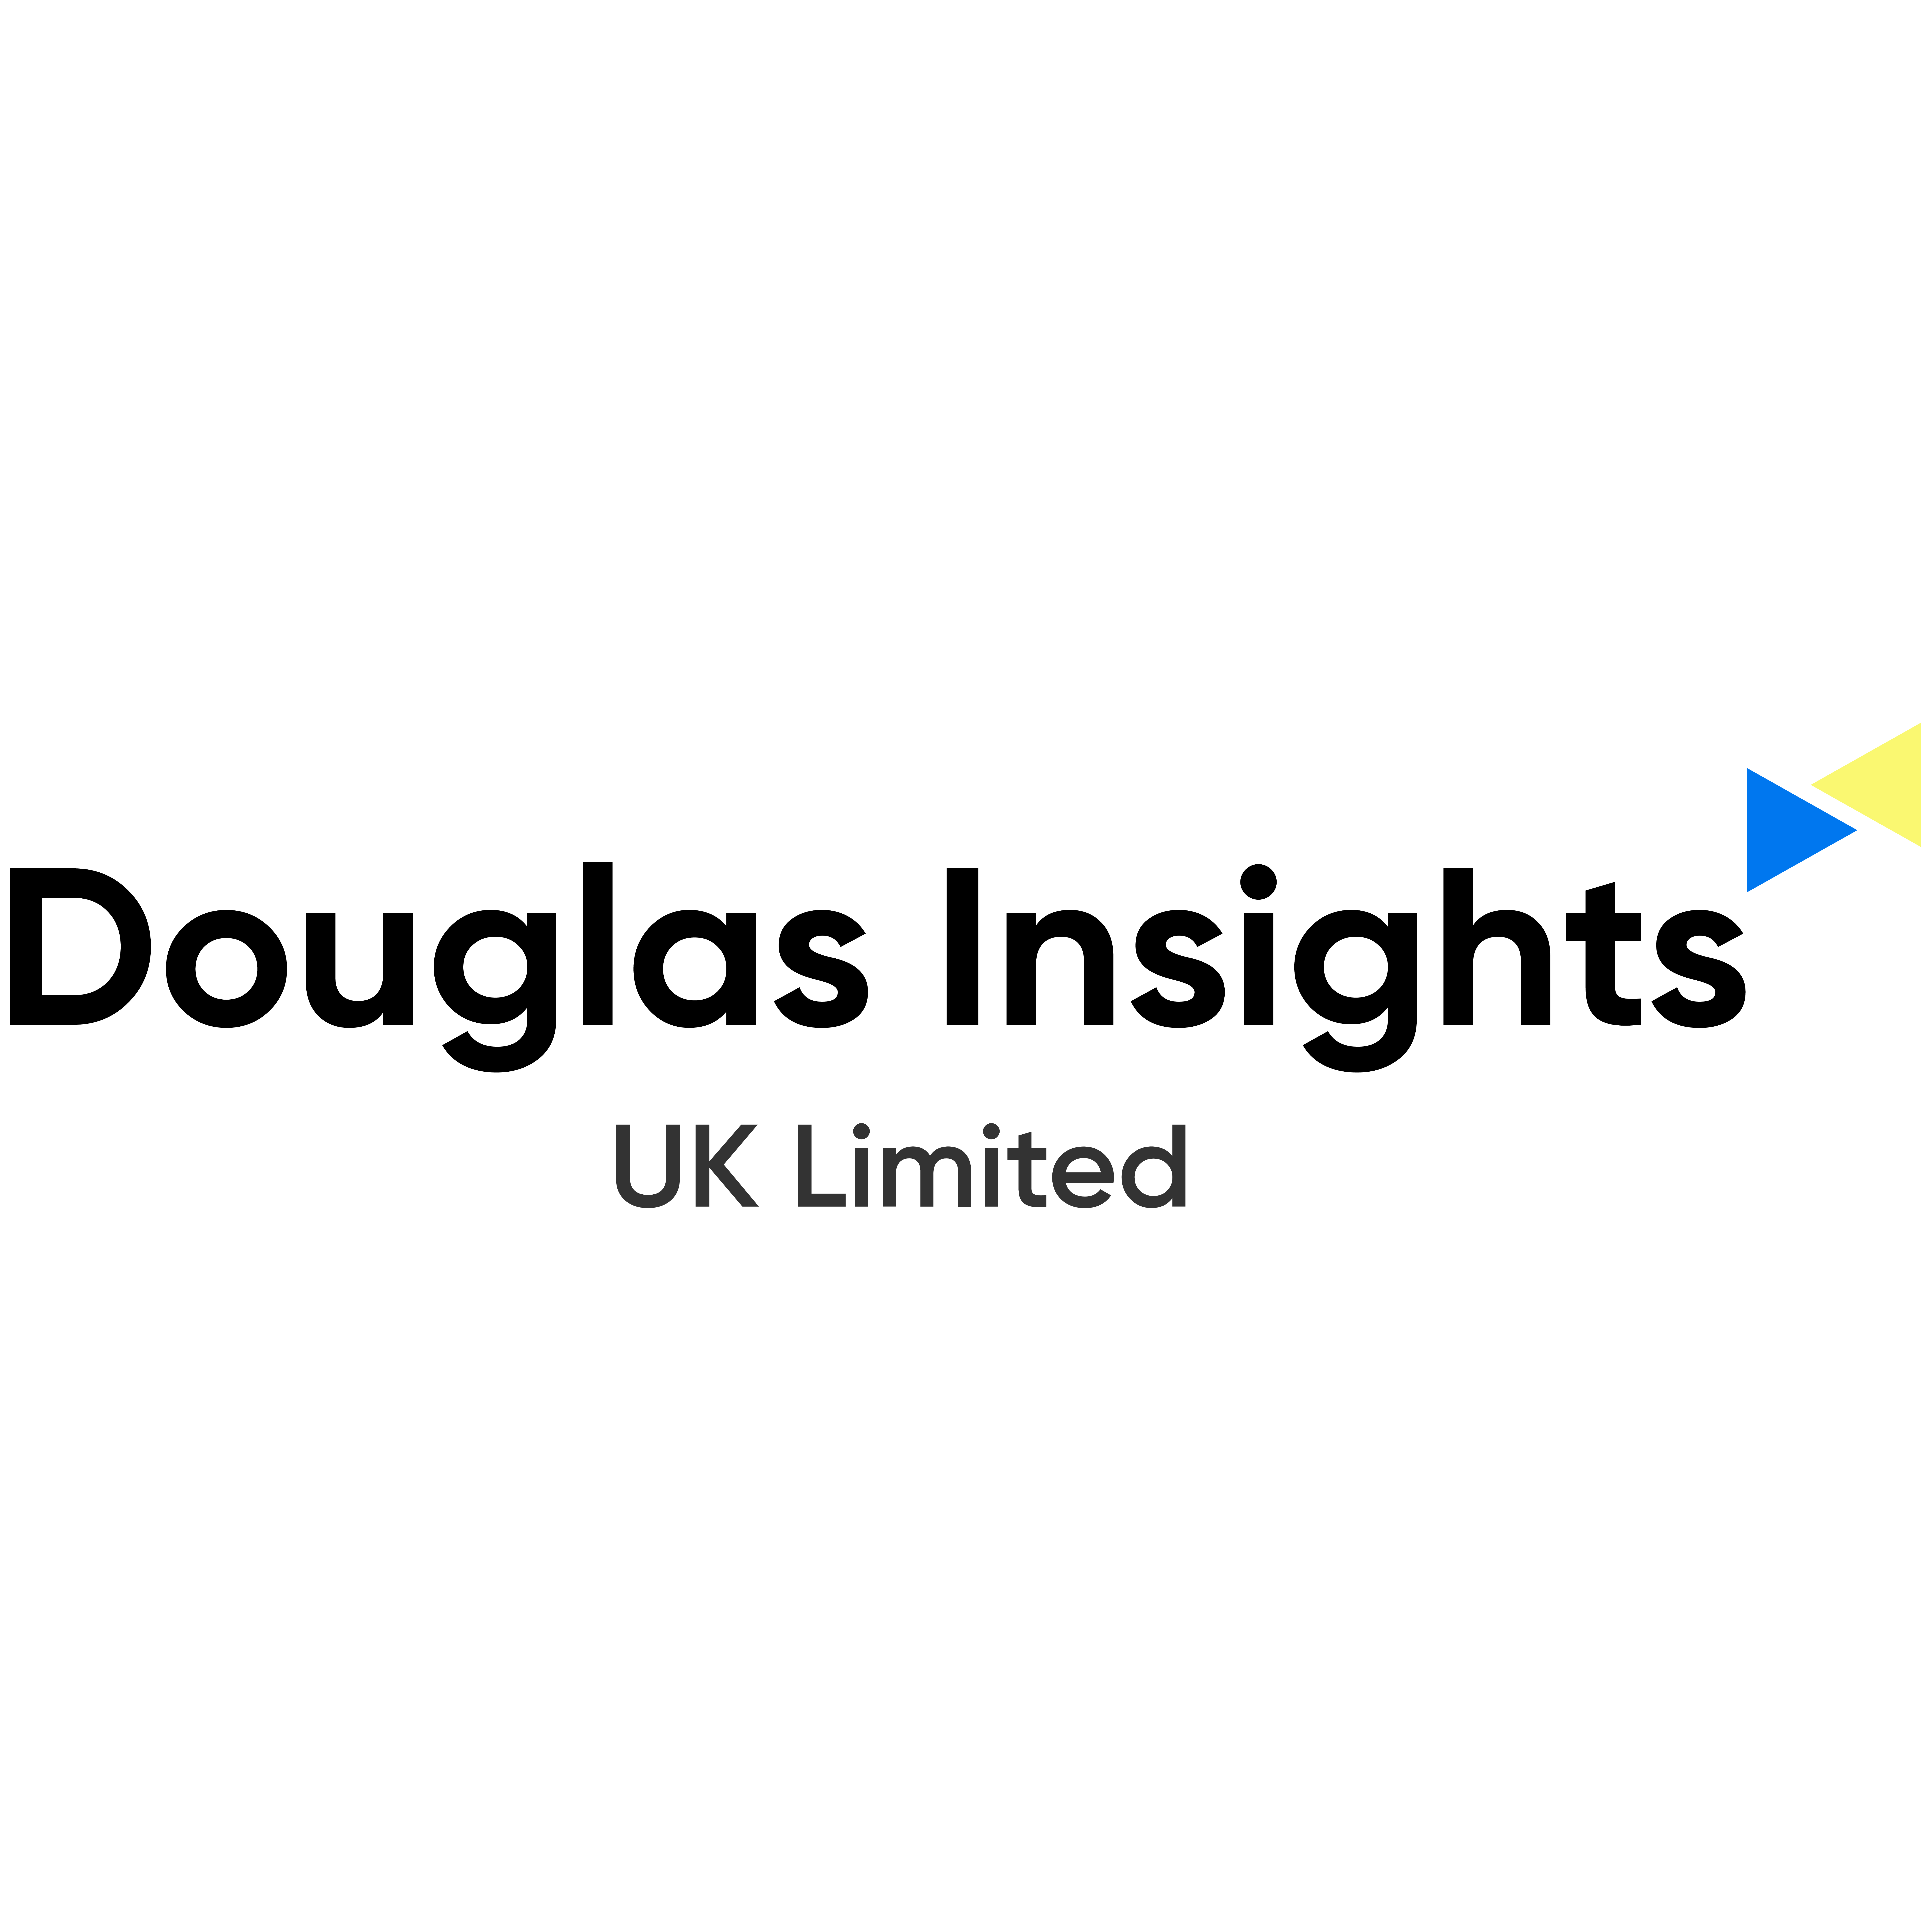 Security Analytics Market is Estimated to Grow at CAGR of 17.5%, 2020-2027 | Latest Industry Coverage by Douglas Insights